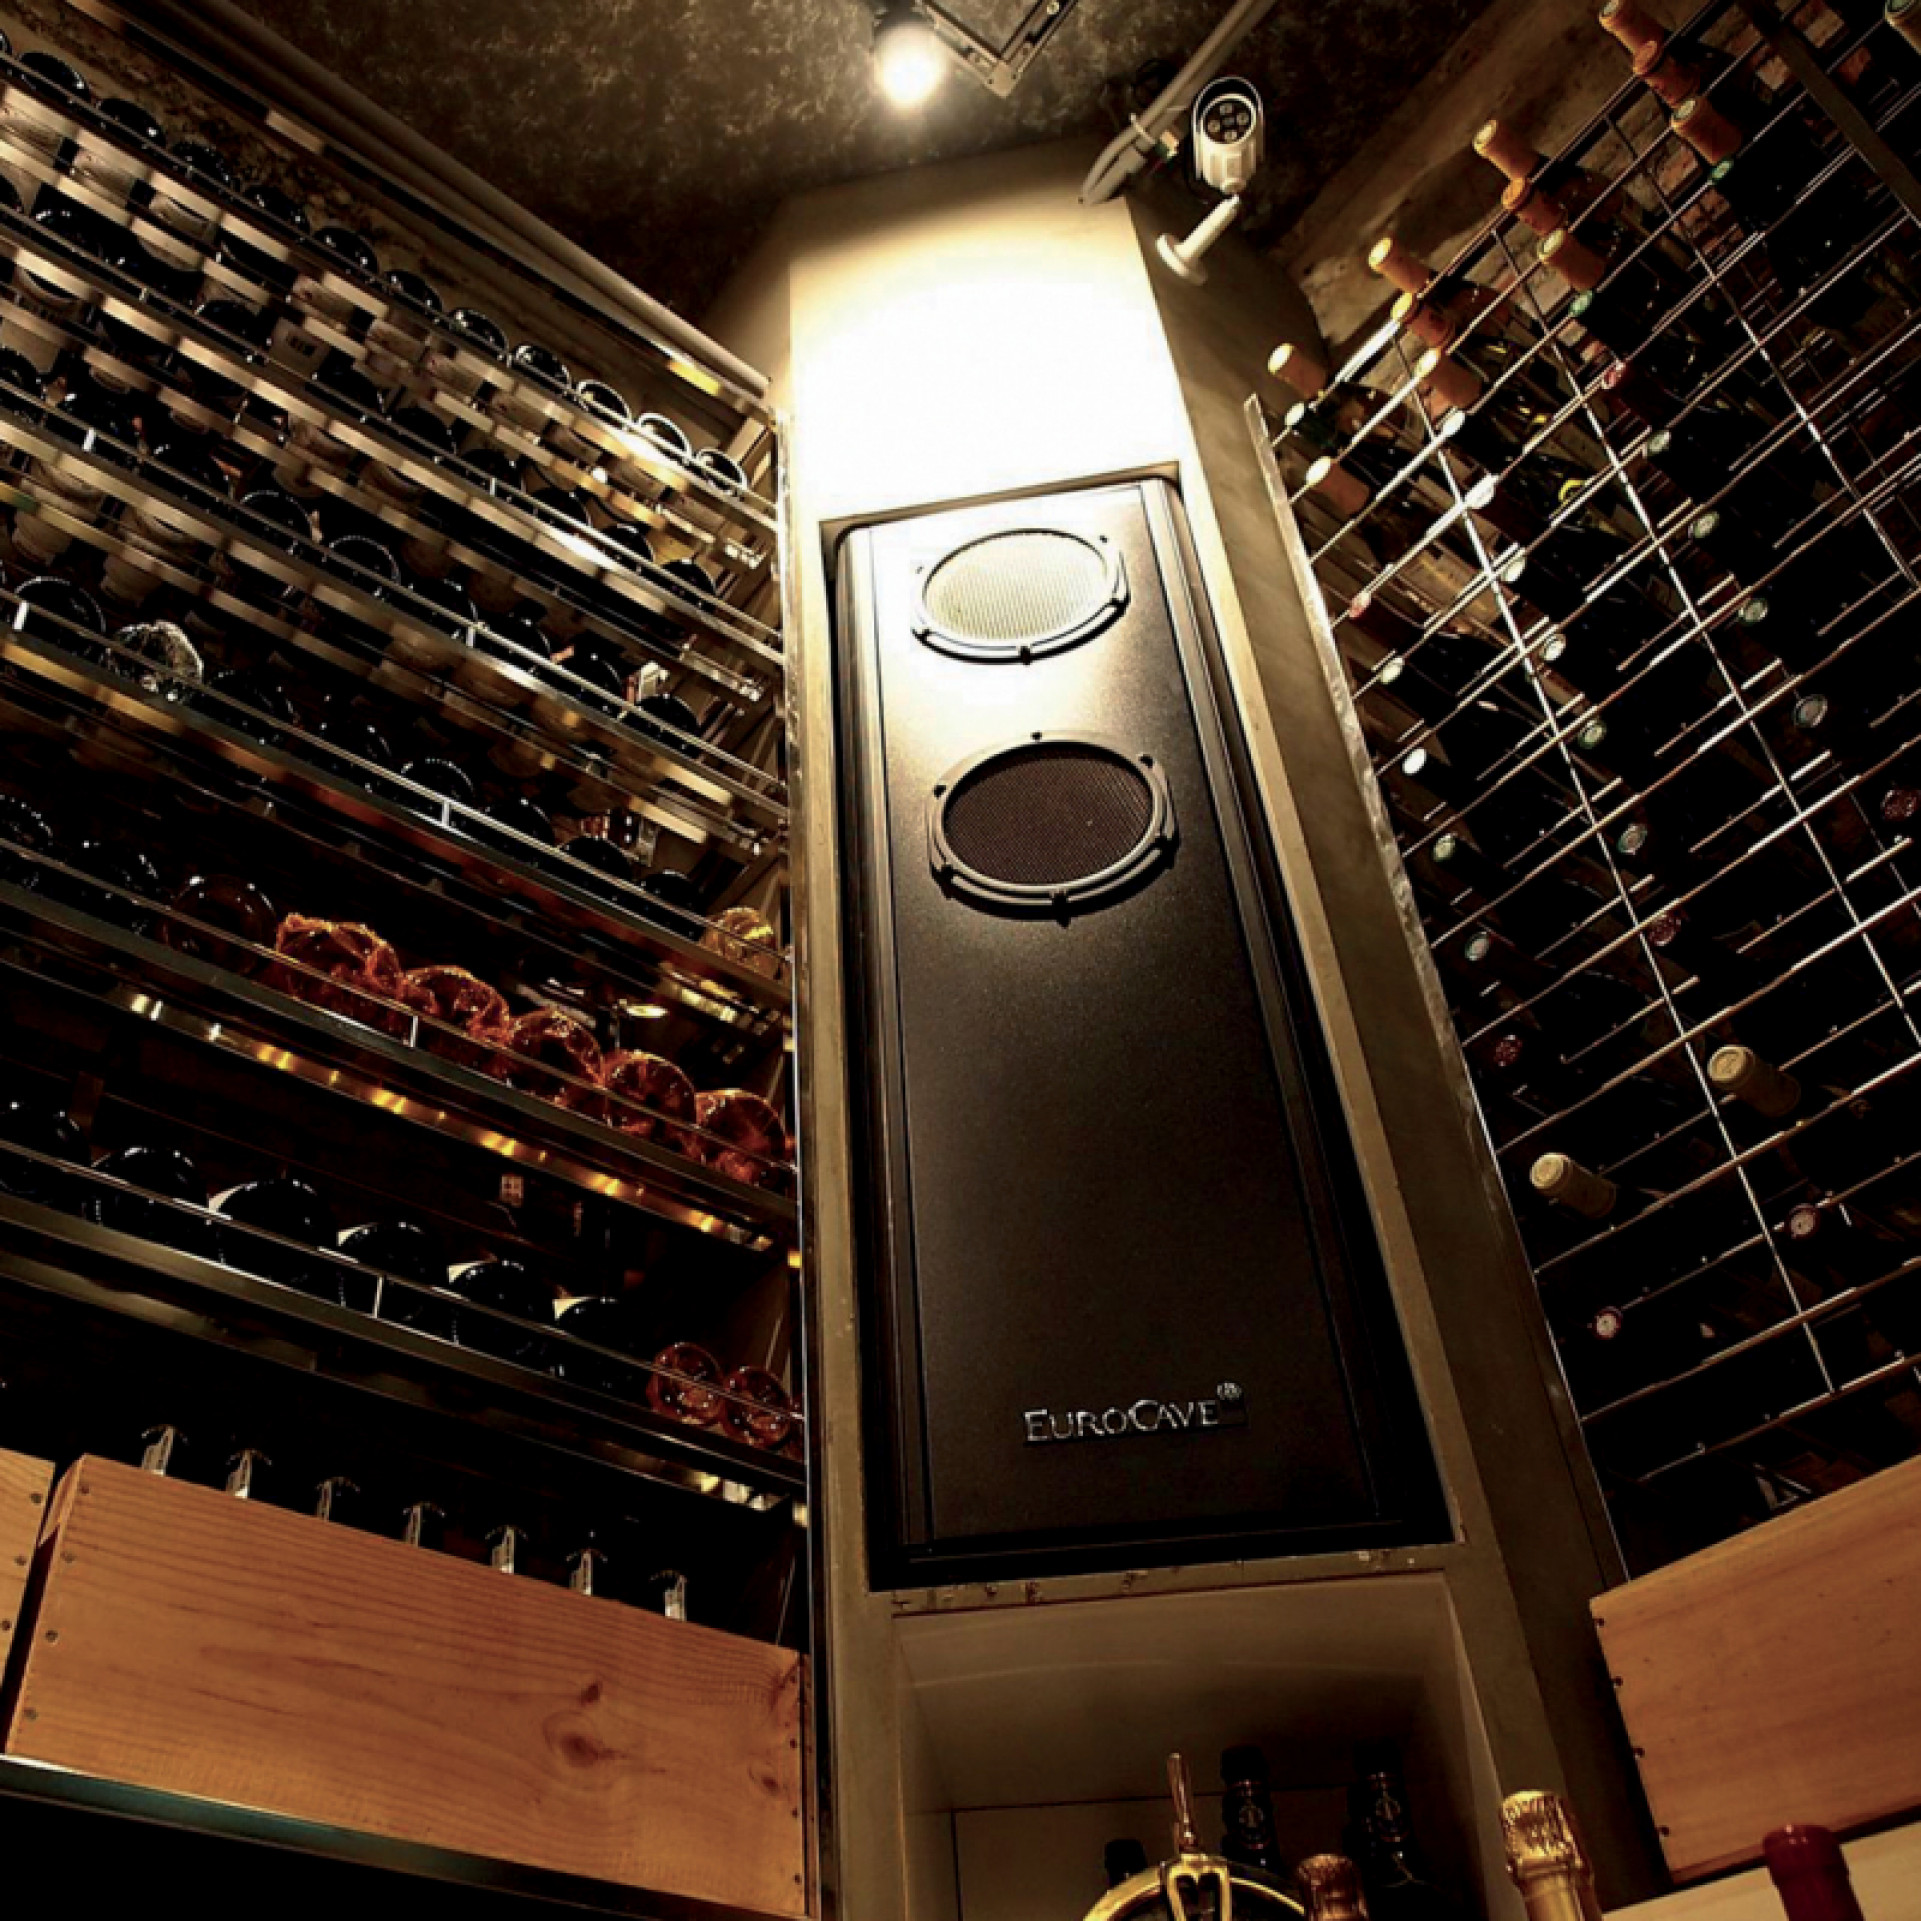 Monoblock wine cellar air conditioner. Large volume air conditioning power up to 50 m3. Constant temperature, hygrometry preserved, air renewal. Remote control to measure the temperature as close as possible to the bottles.